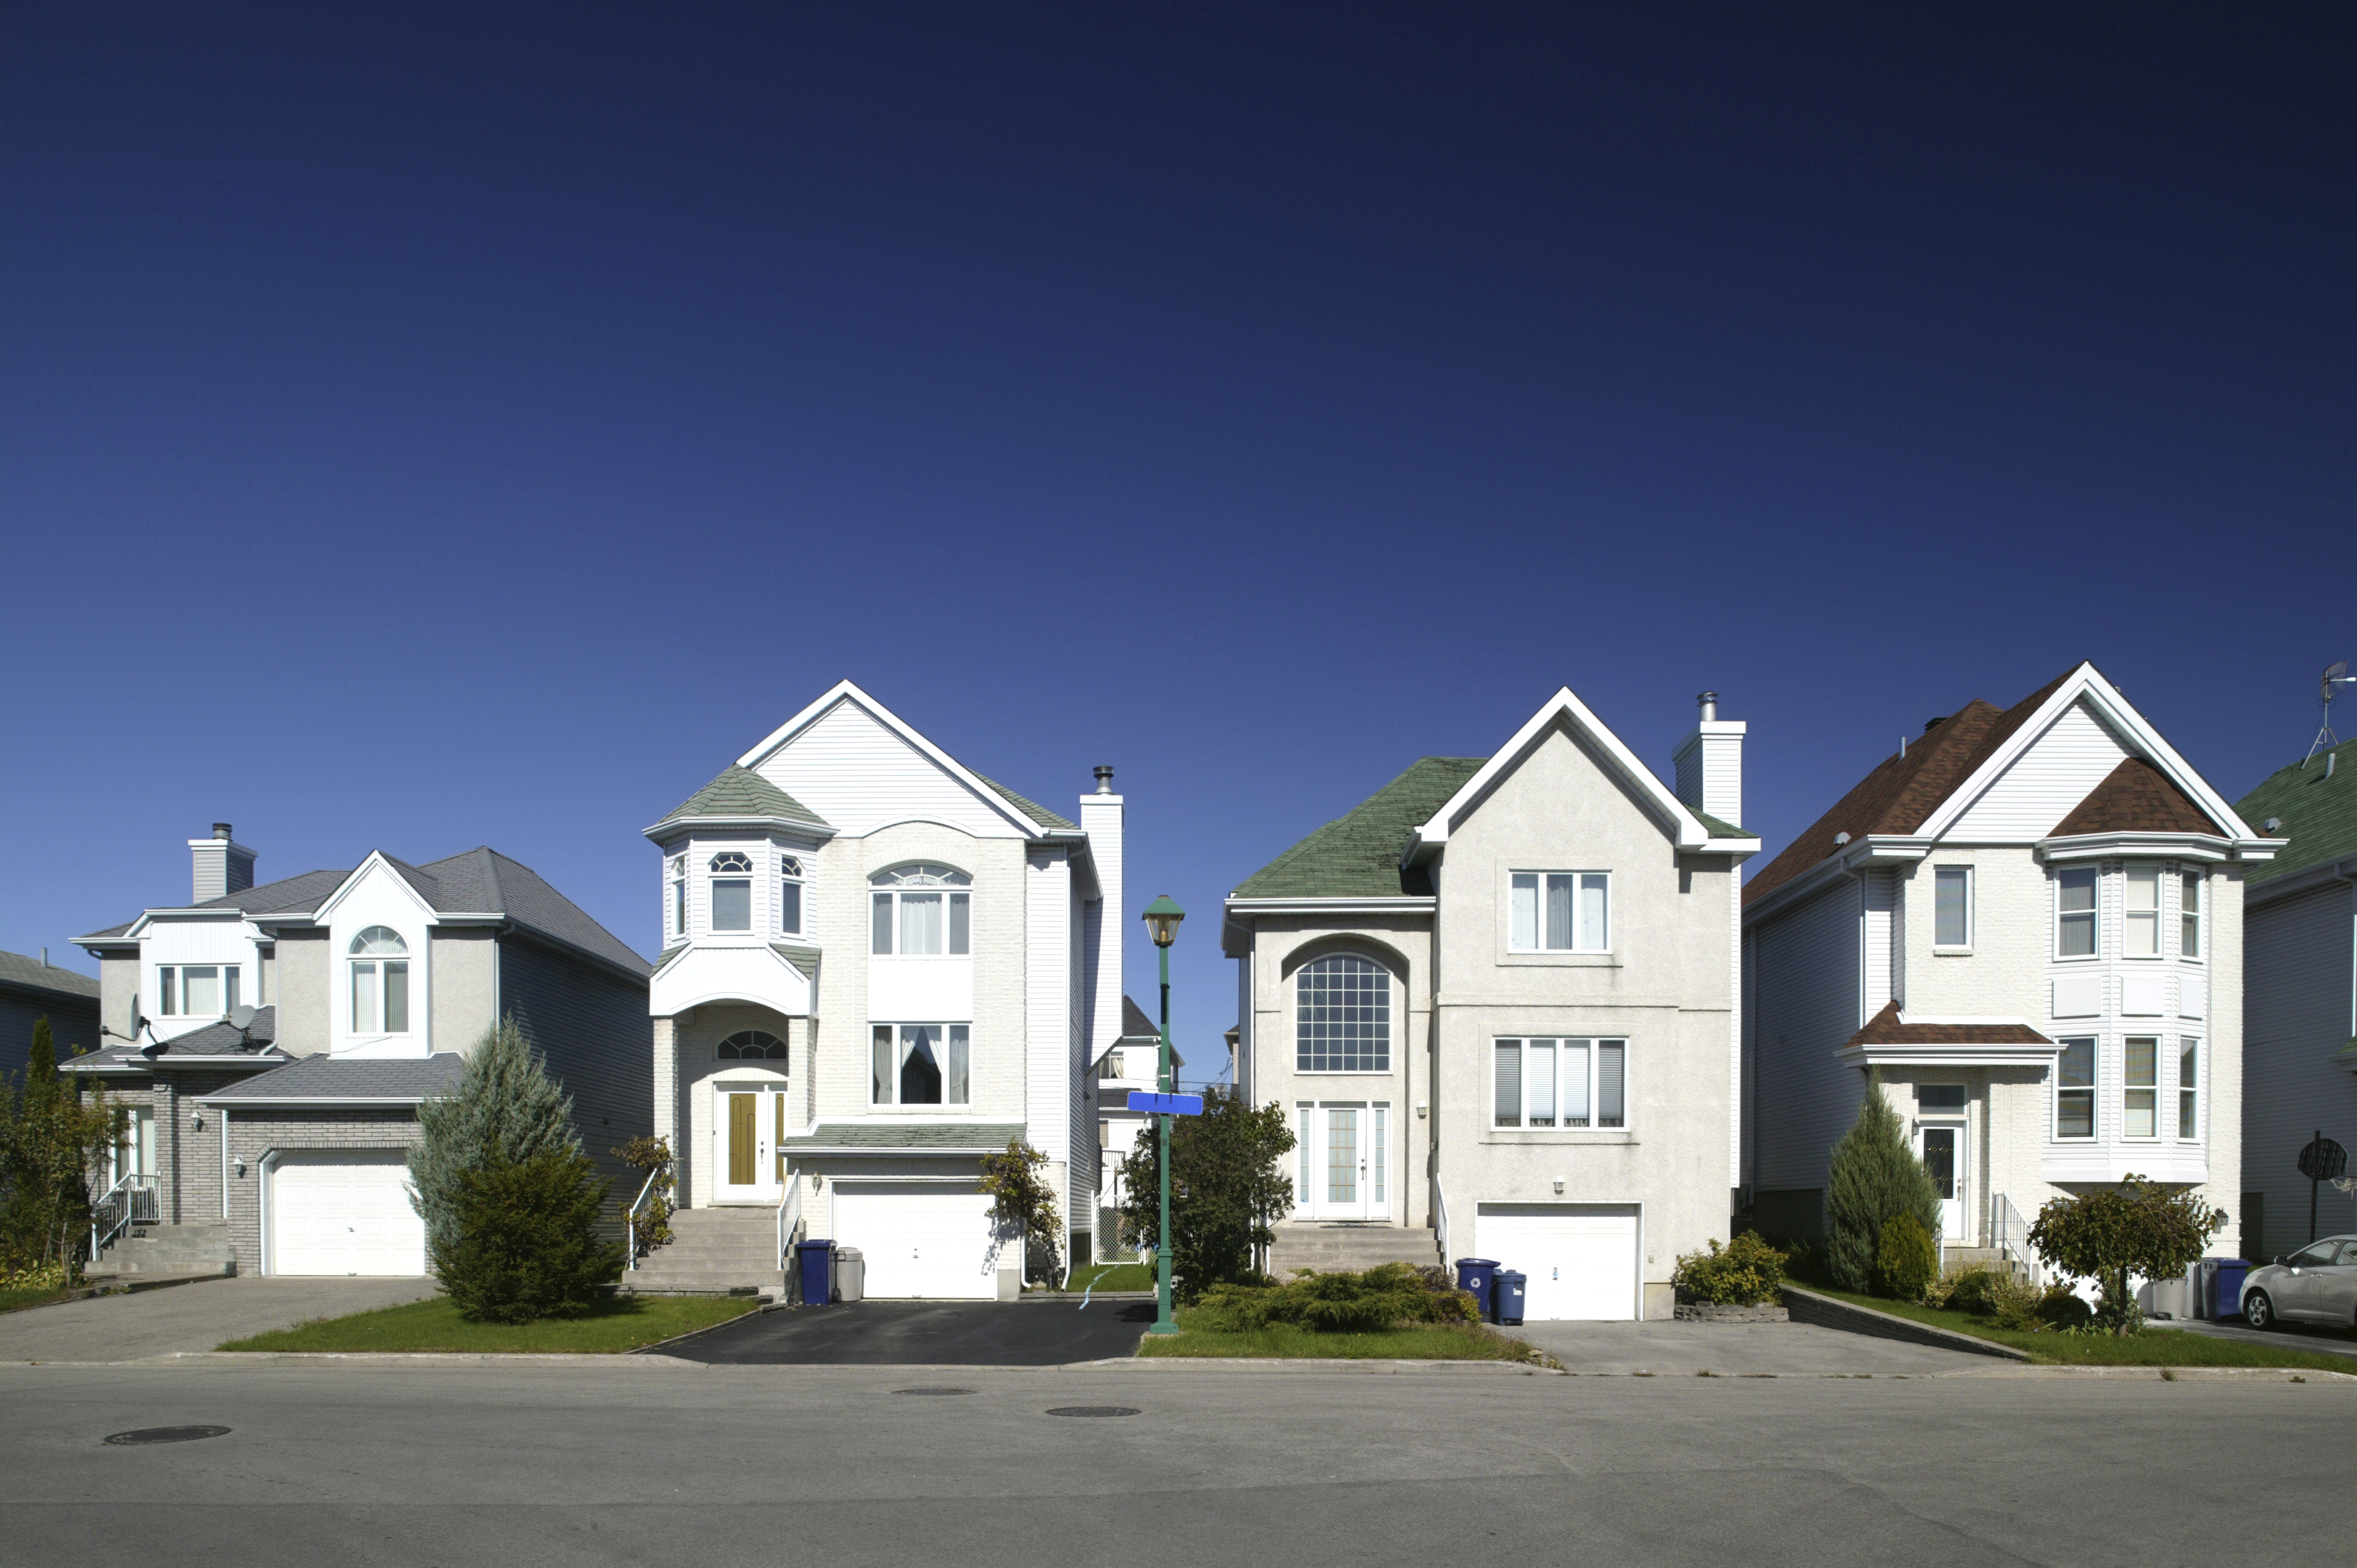 residential district (Getty Images)